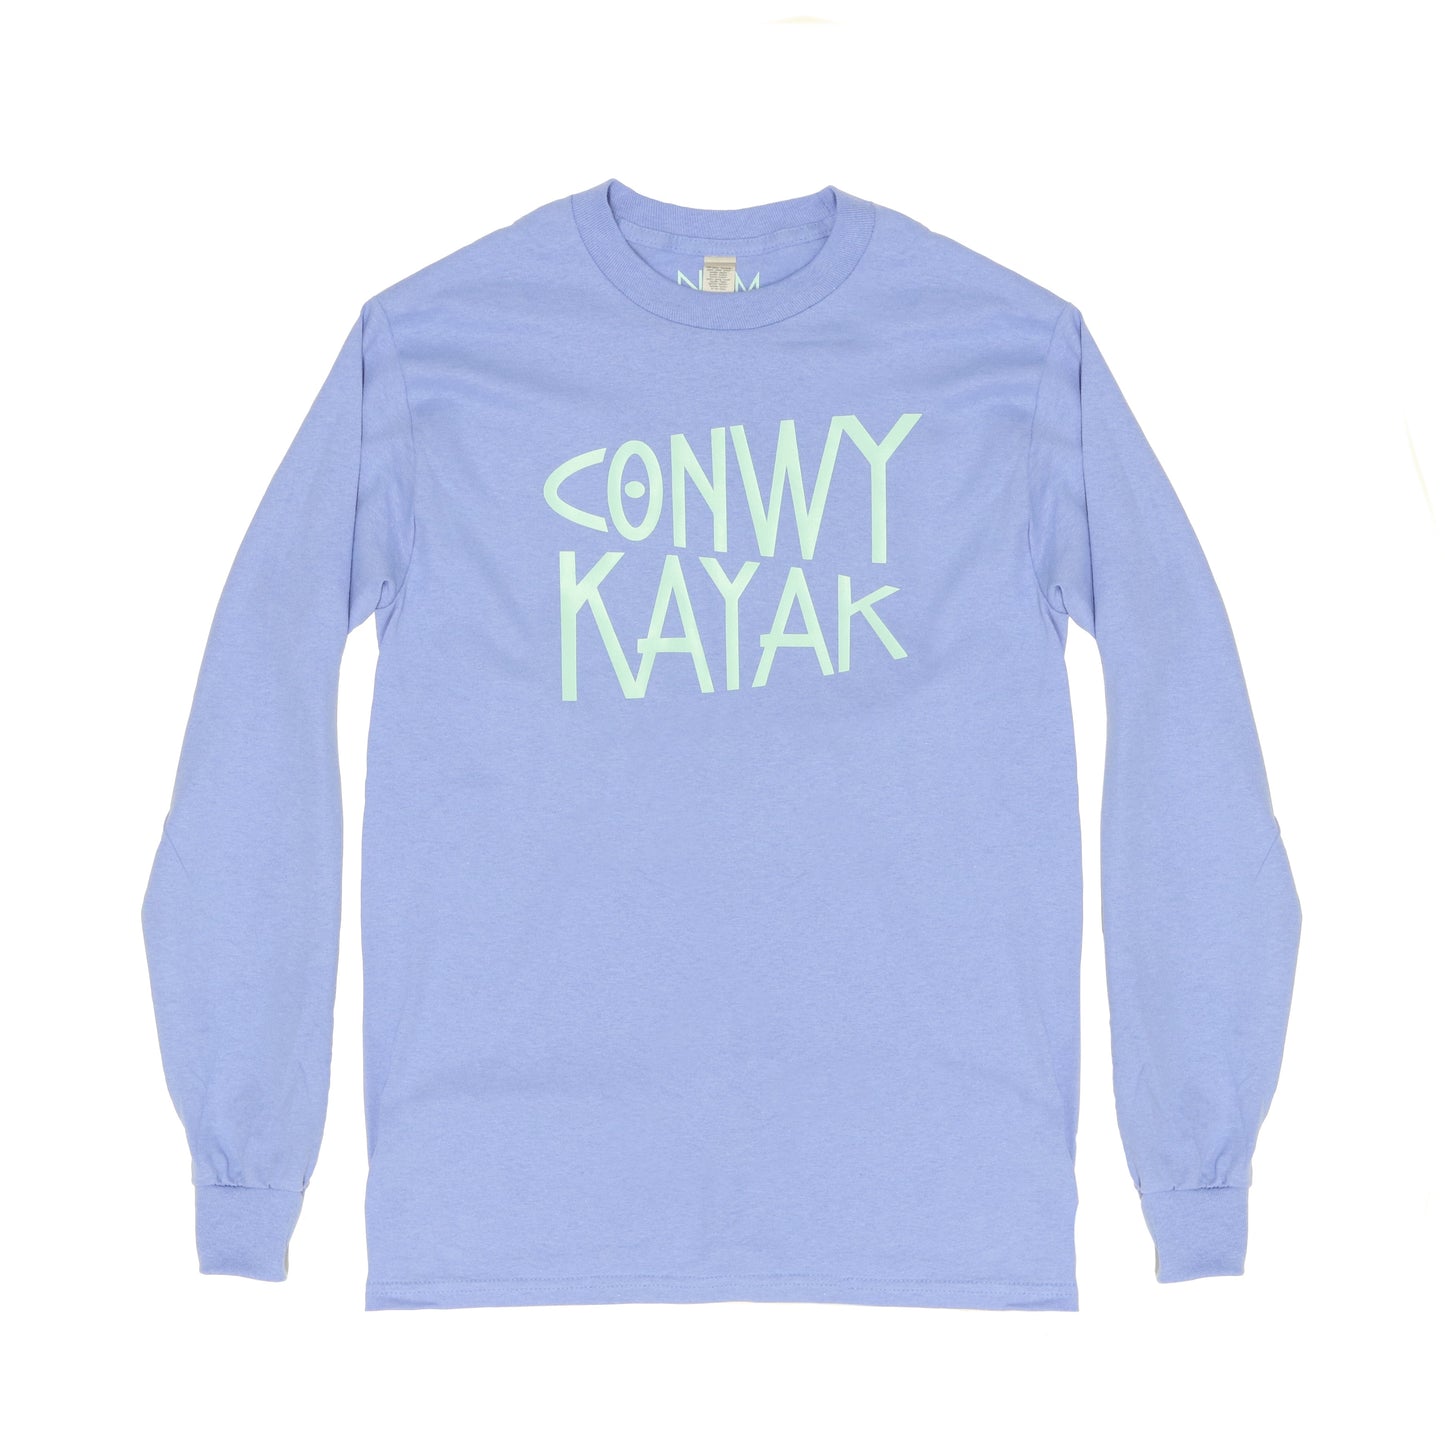 Conwy Kayak - Blue Long Sleeve T-Shirt - 1